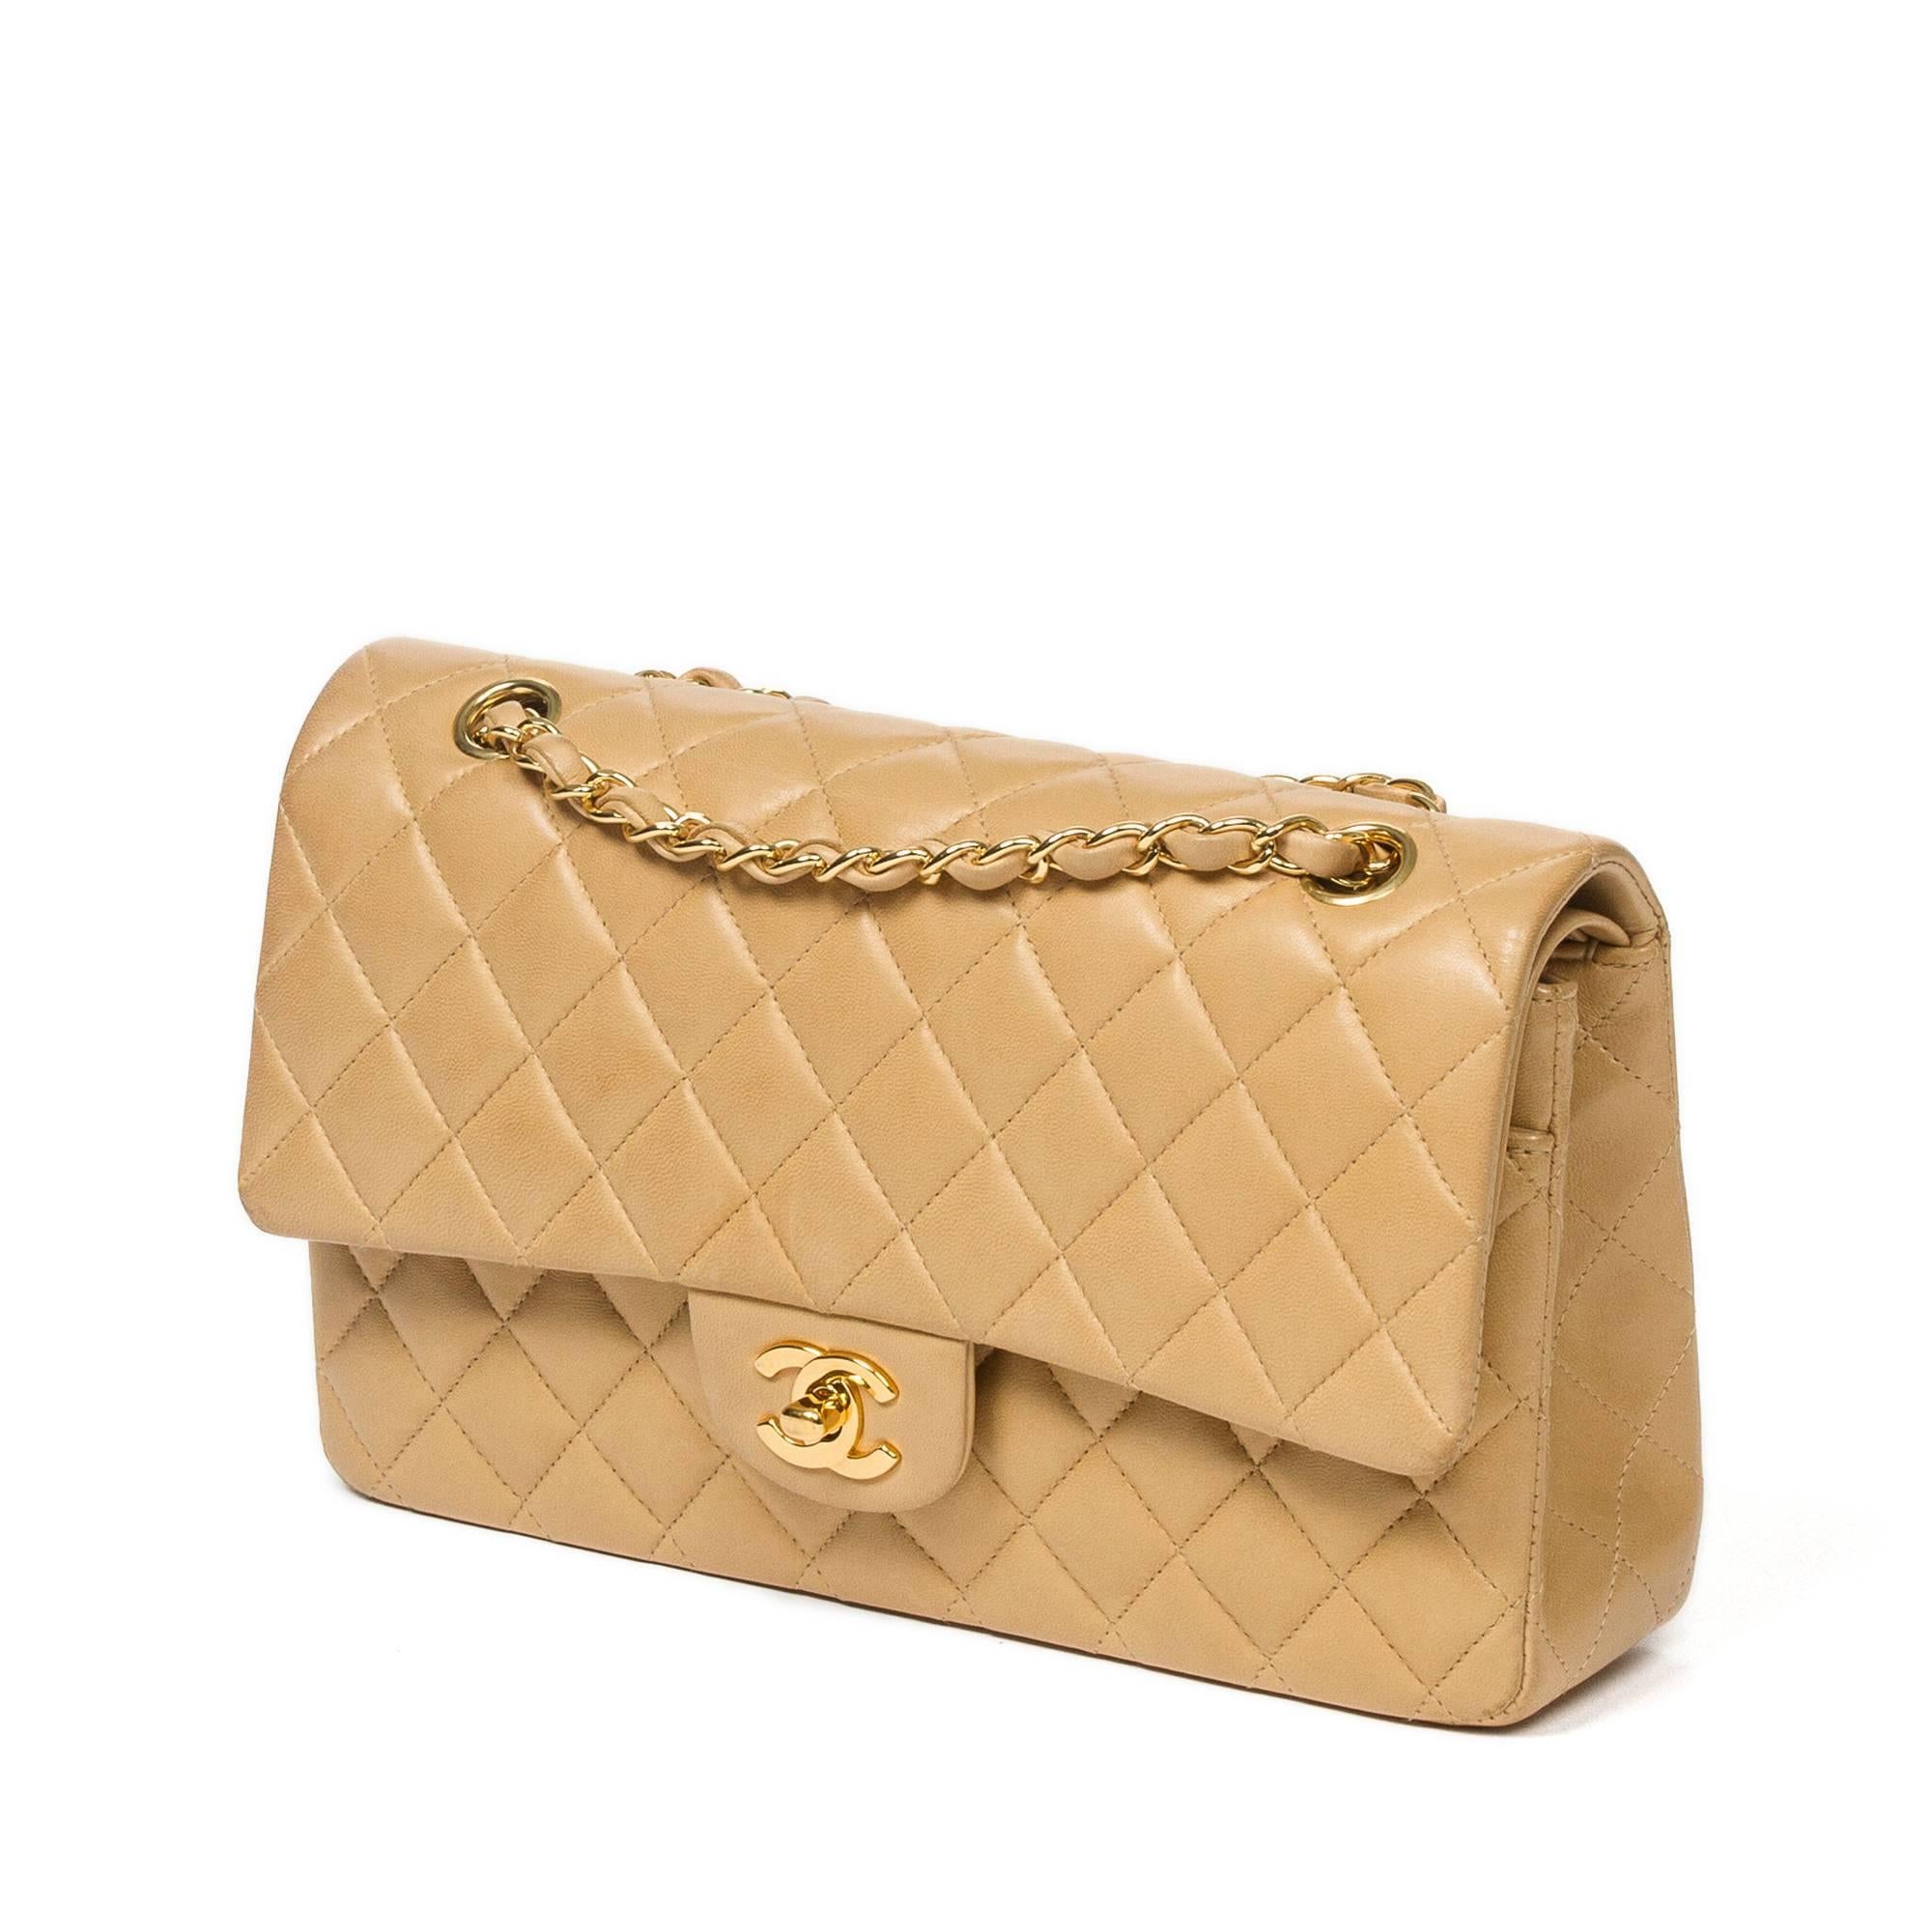 Shoulder bag Chanel Classic Double Flap in beige leather. Production code of this product is 499449. This product is in good condition. It presents some slight signs of wear but was well Kept. Dimensions of the bag are 26*16*7cm. This bag has been